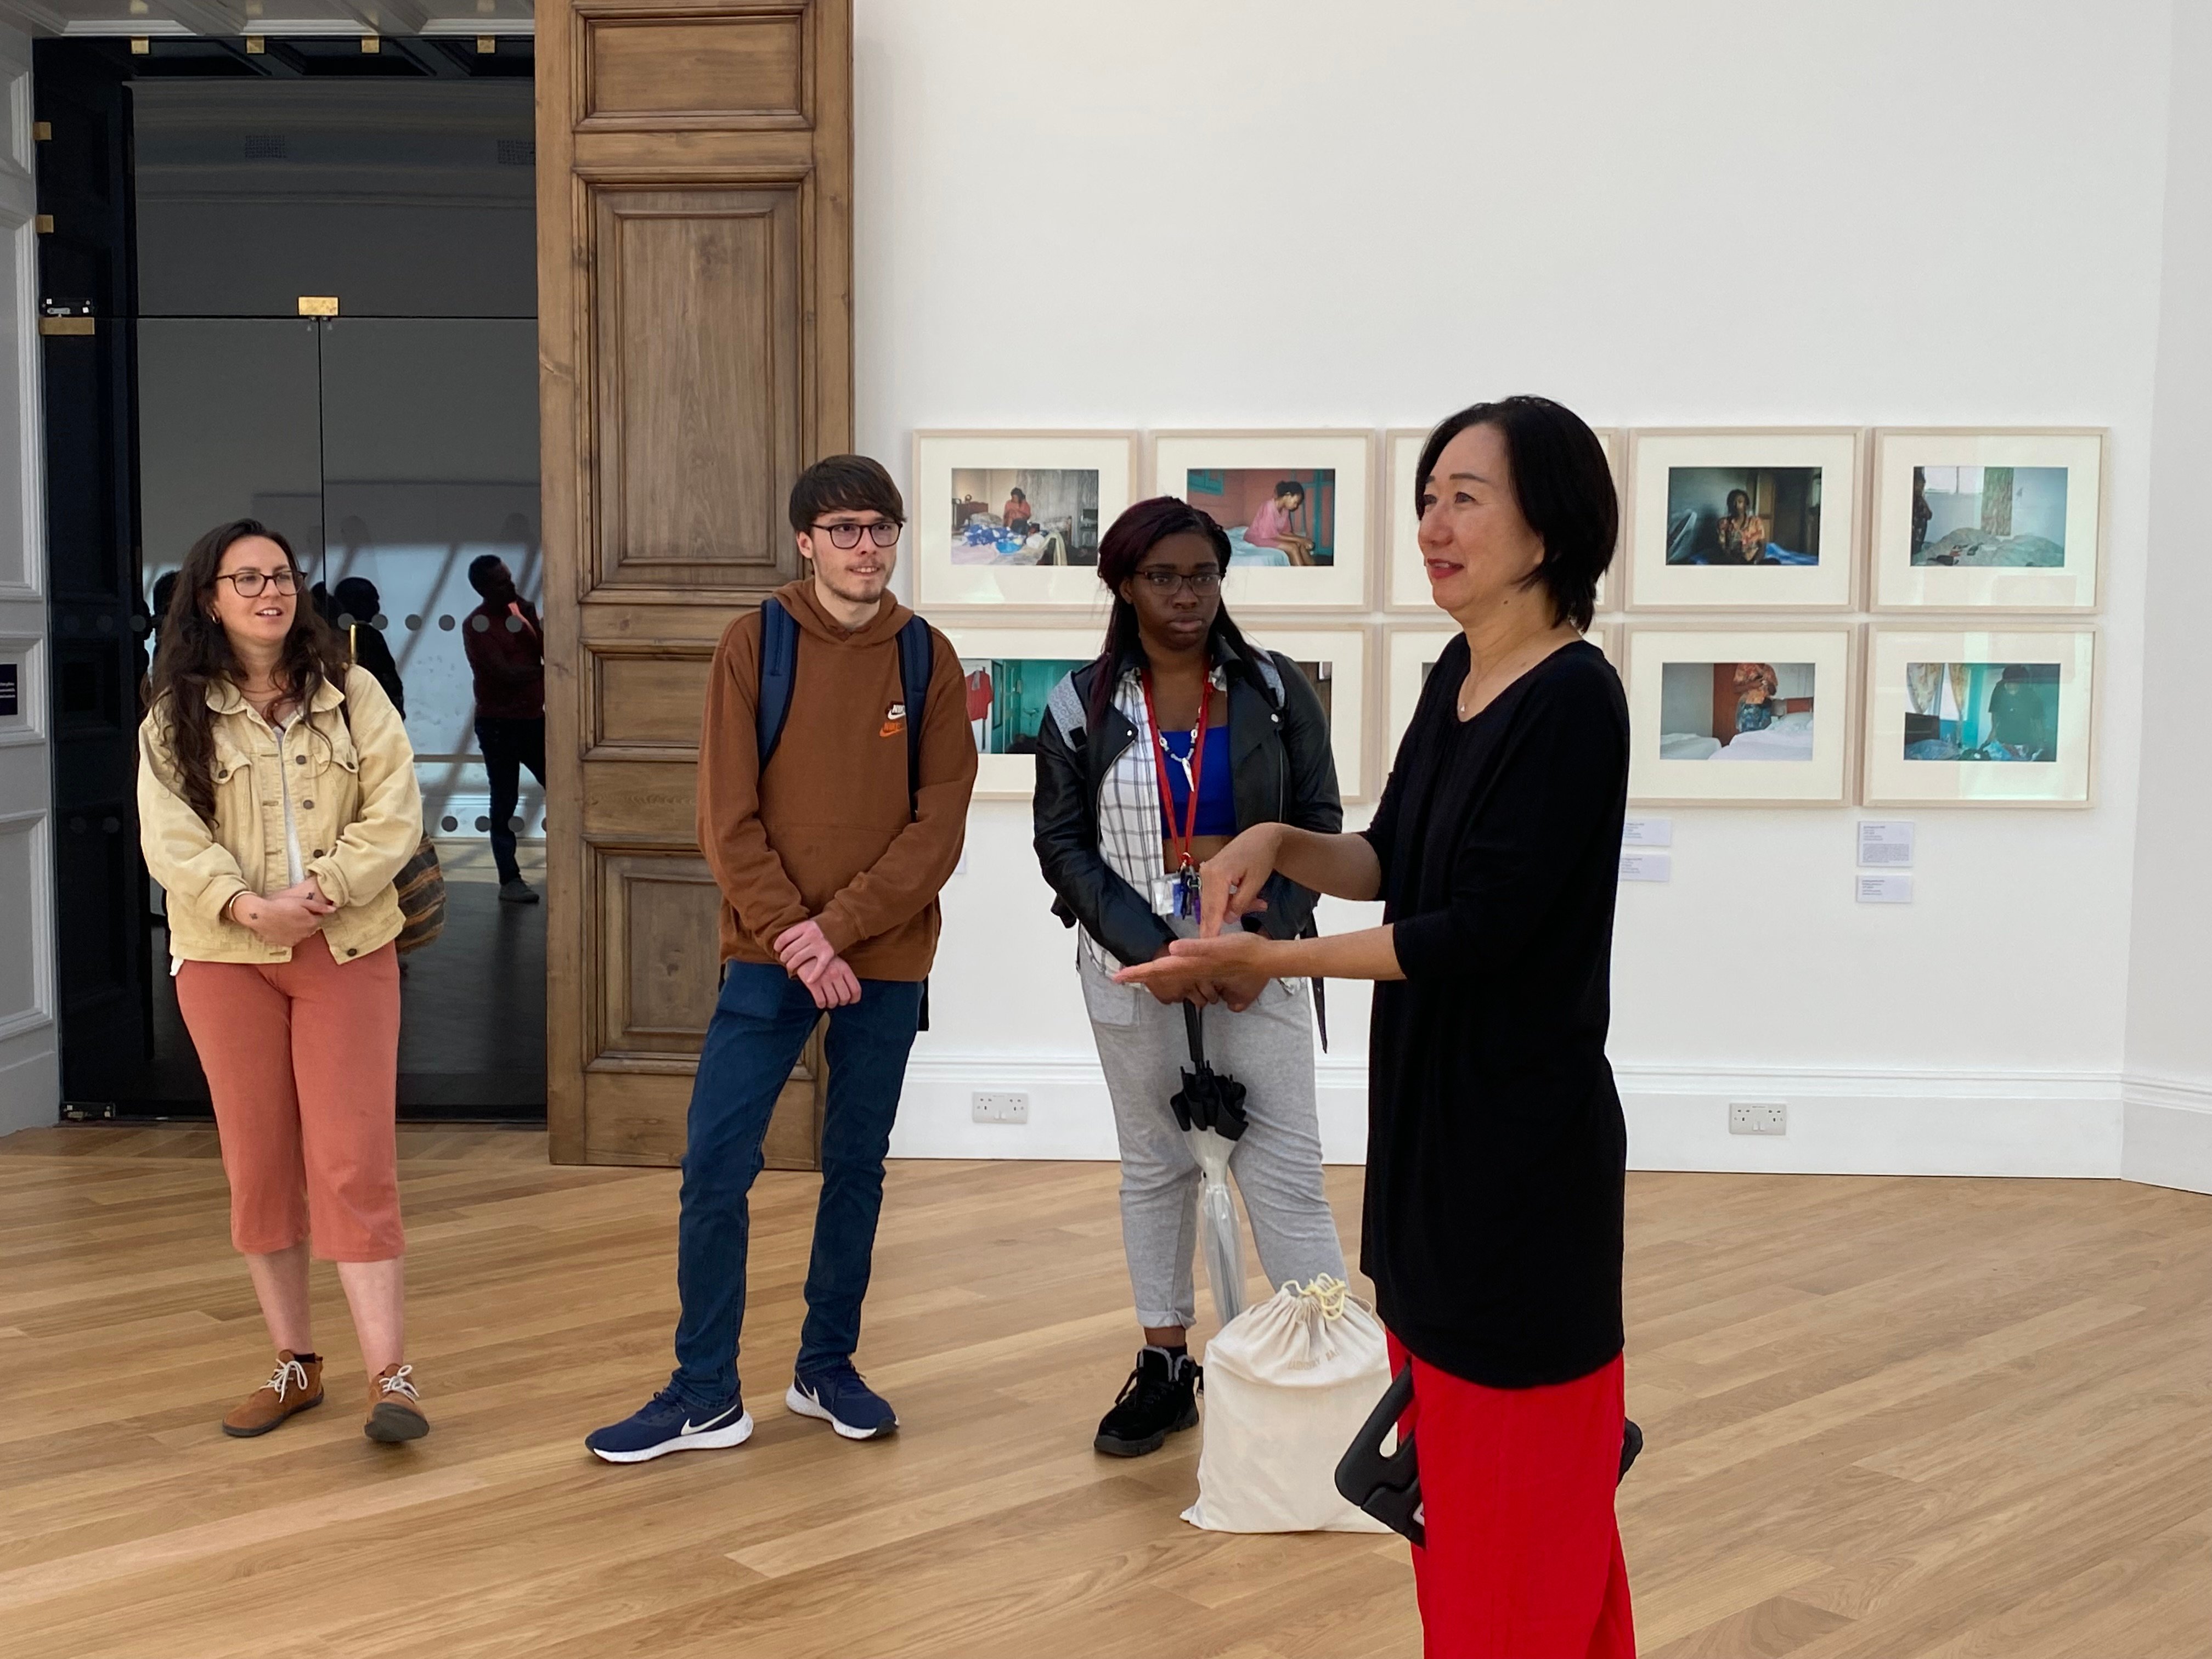 A British Sign Language Tour taking place in the gallery space 